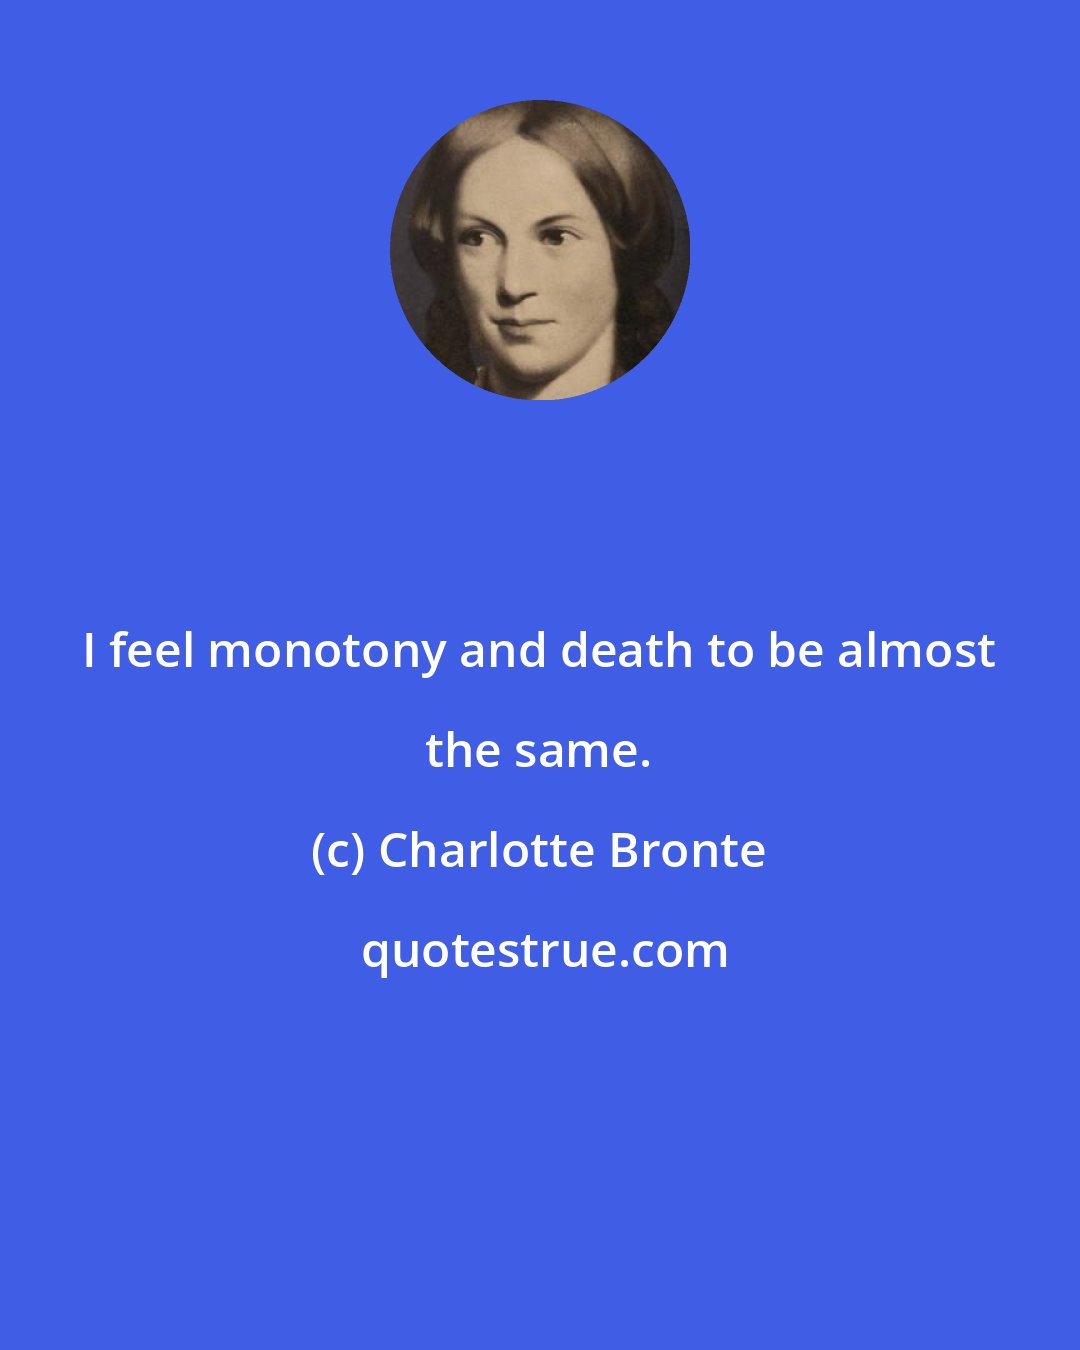 Charlotte Bronte: I feel monotony and death to be almost the same.